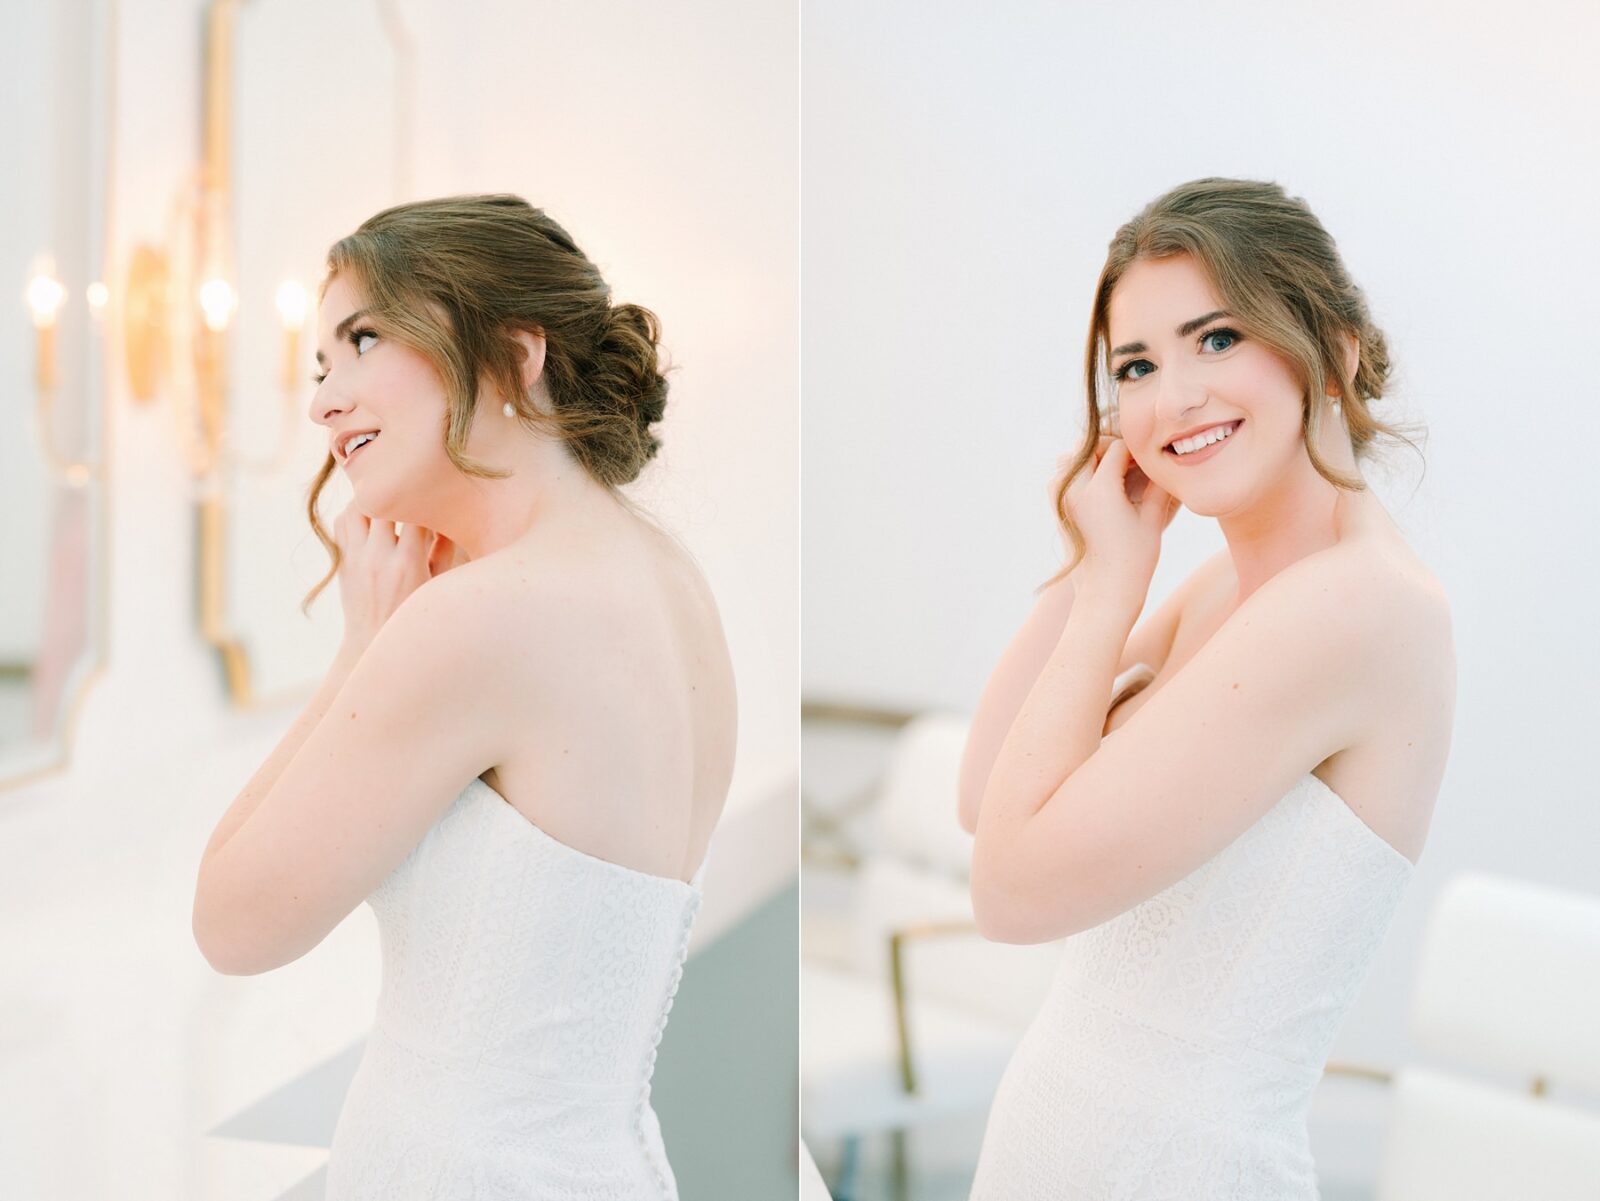 bride putting earrings on, classic getting ready photos, bride getting ready, wedding at the videre estate venue, wimberley, photos by Tara Lyons Photography, Perry's Petal, planning by sweet magnolia events